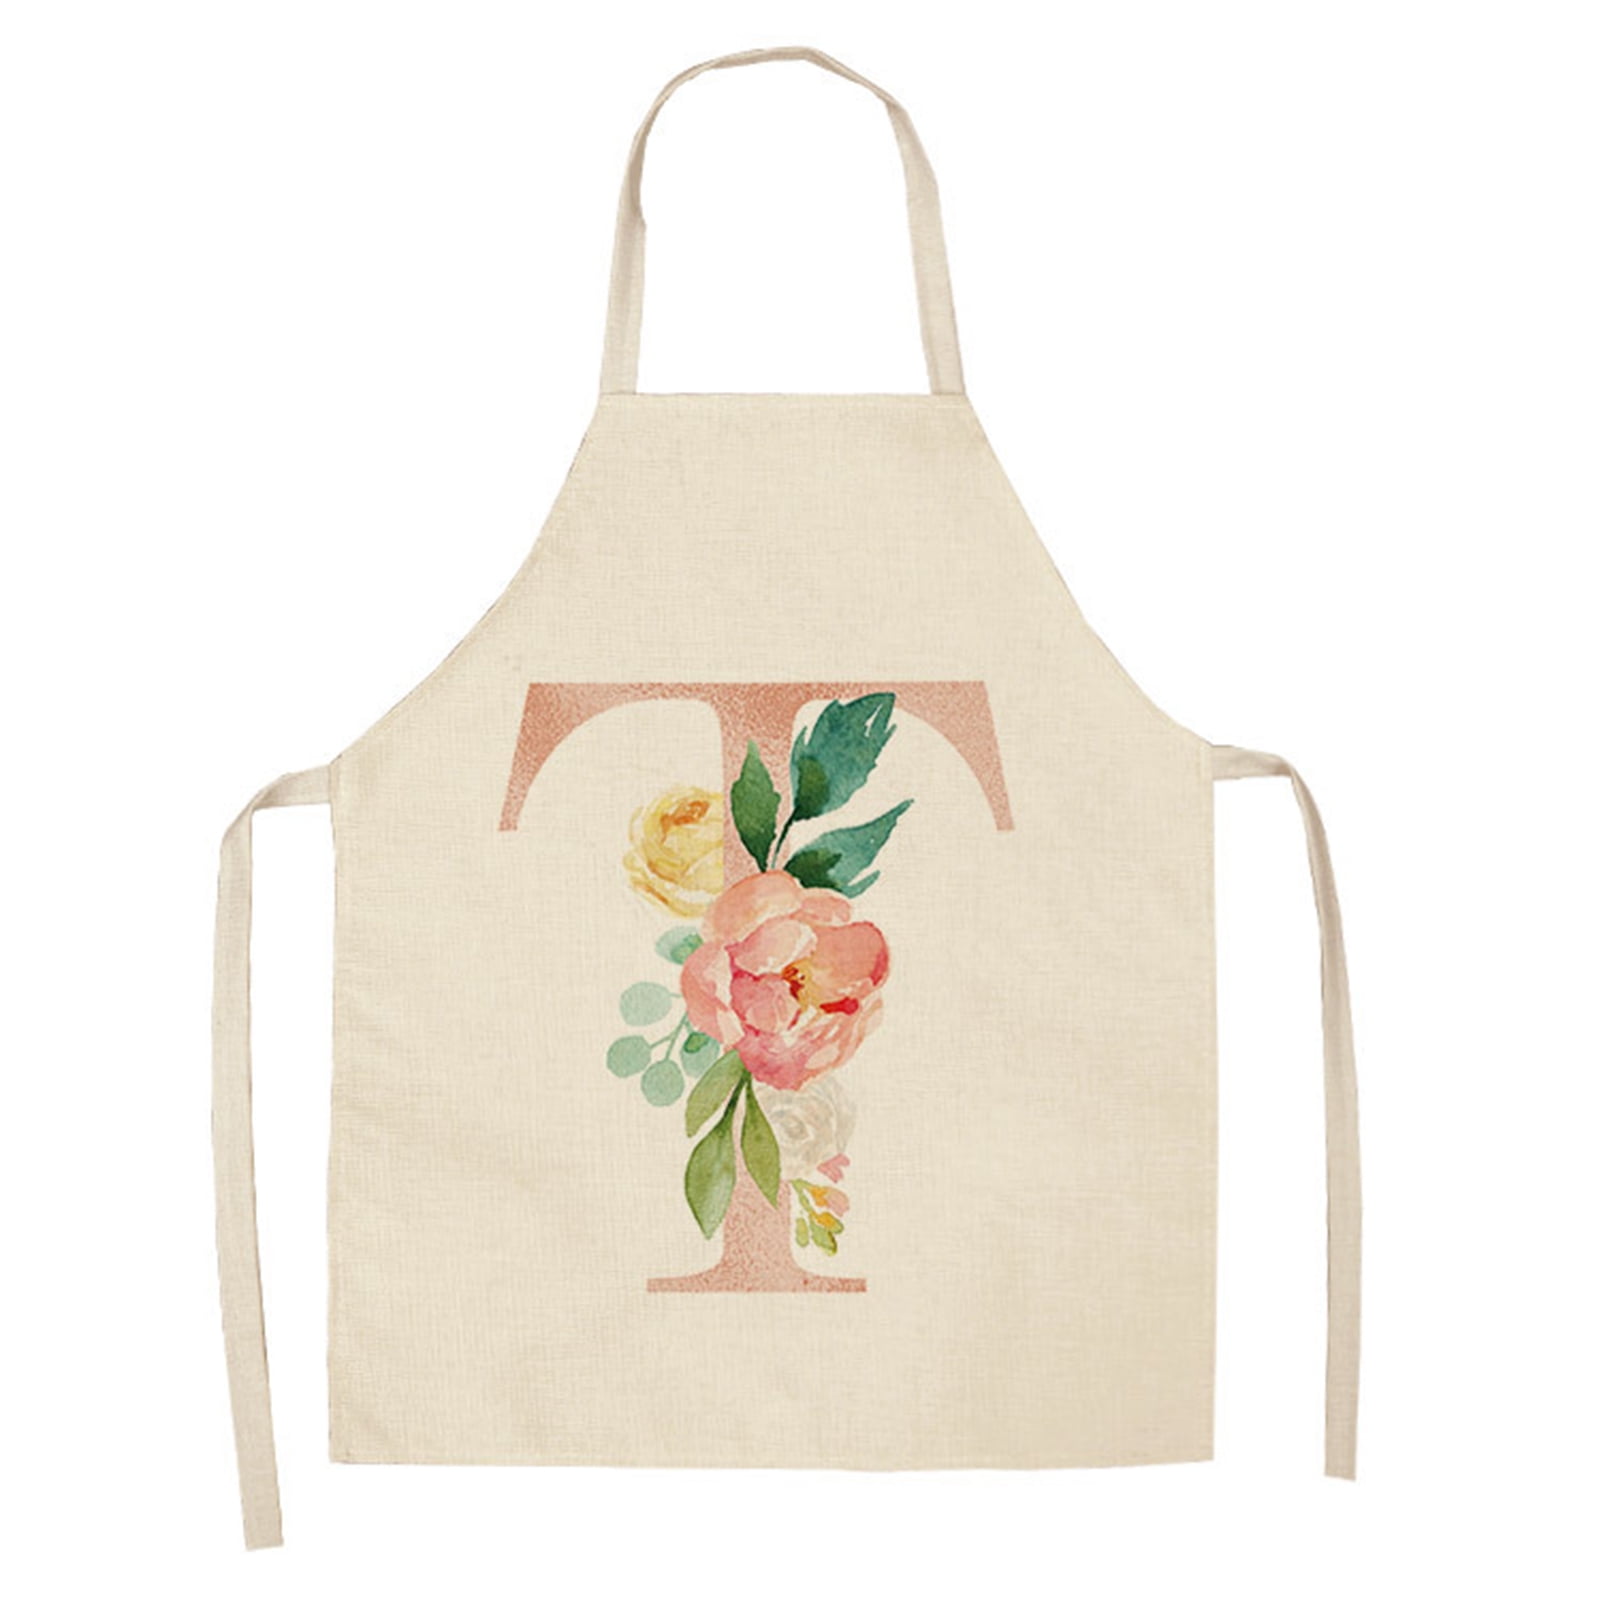 Letter T is for Turtle Chefs Apron